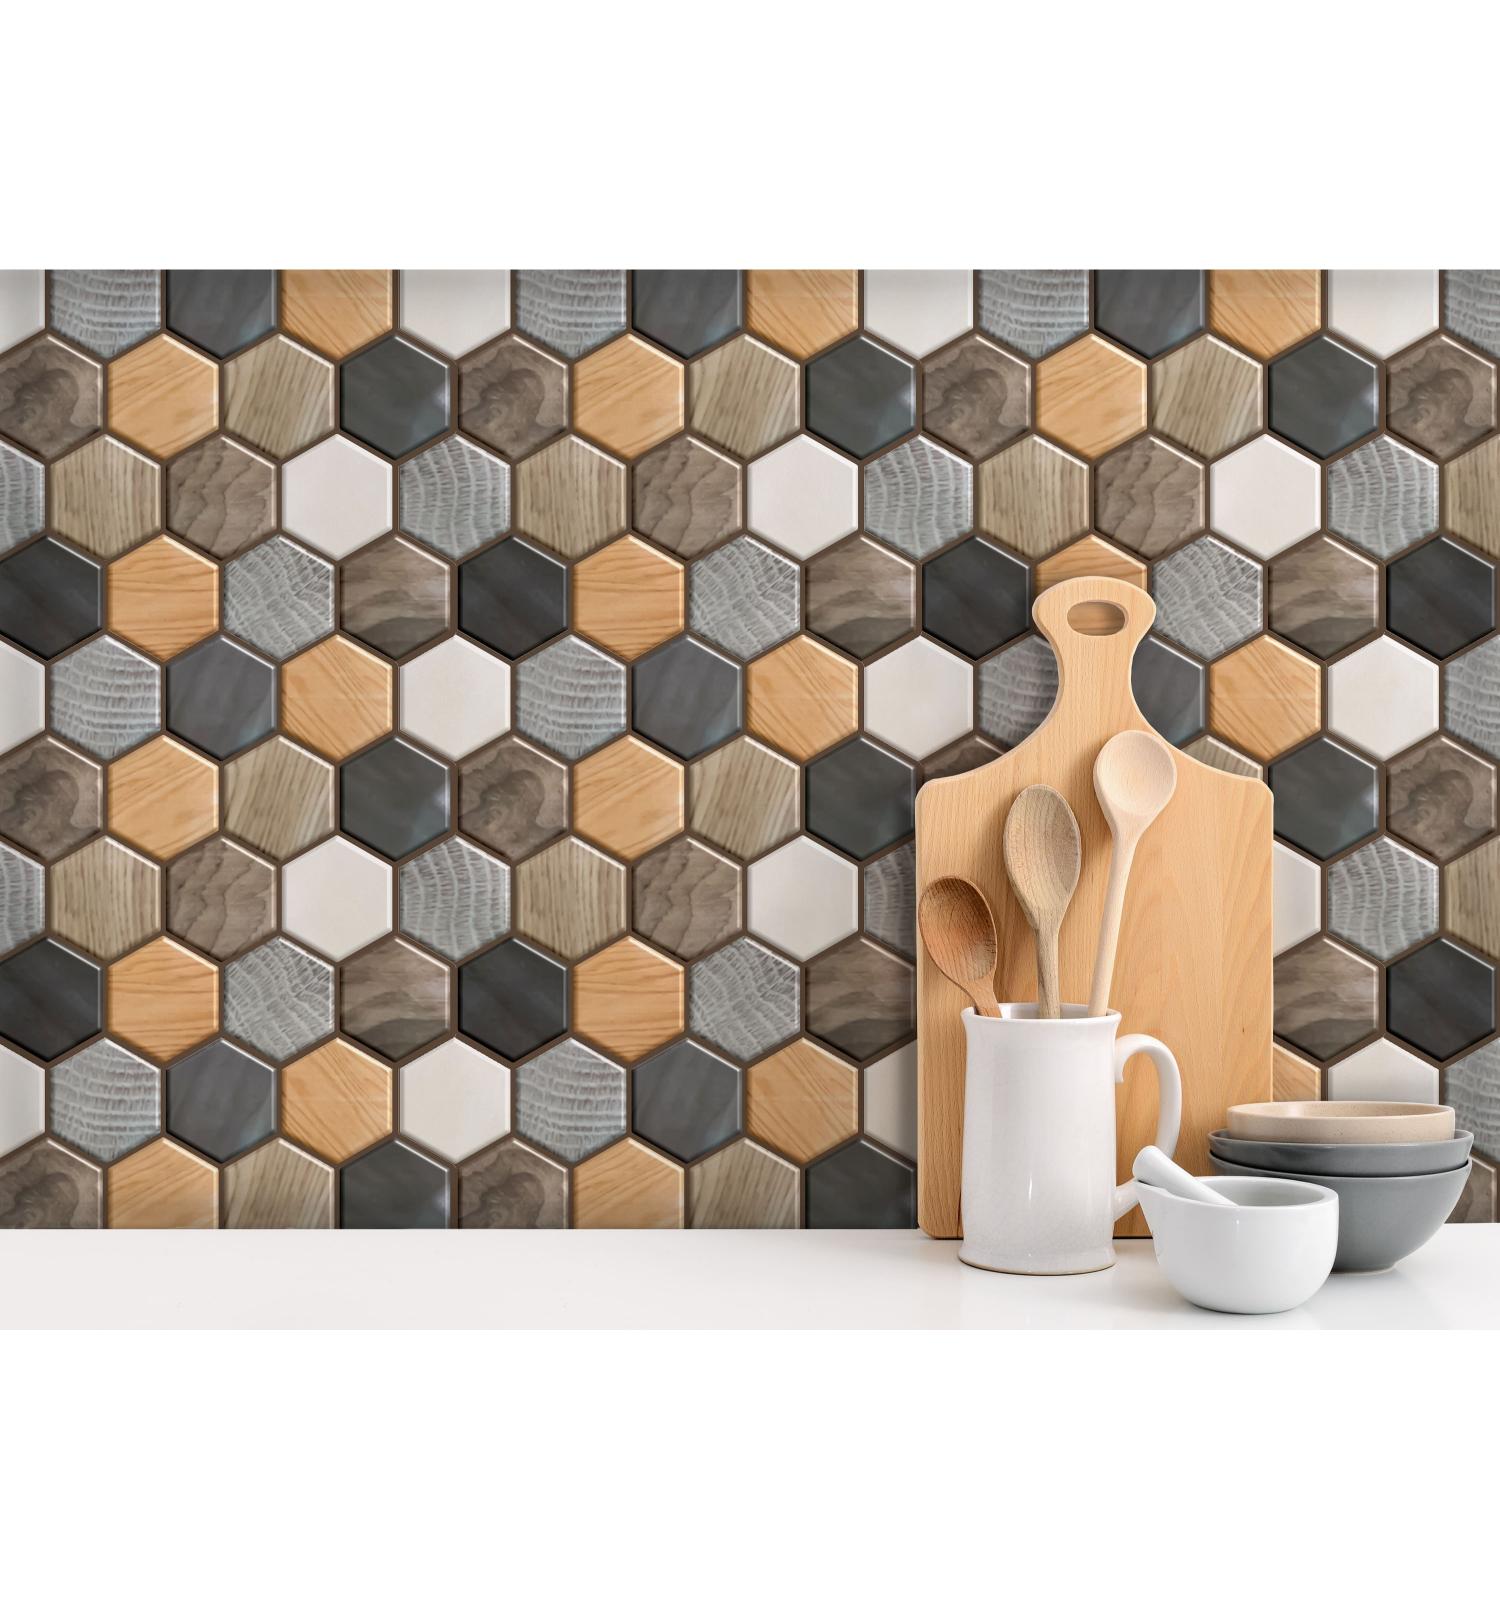 Colored Wooden Peel and Stick Hexagon Tiles